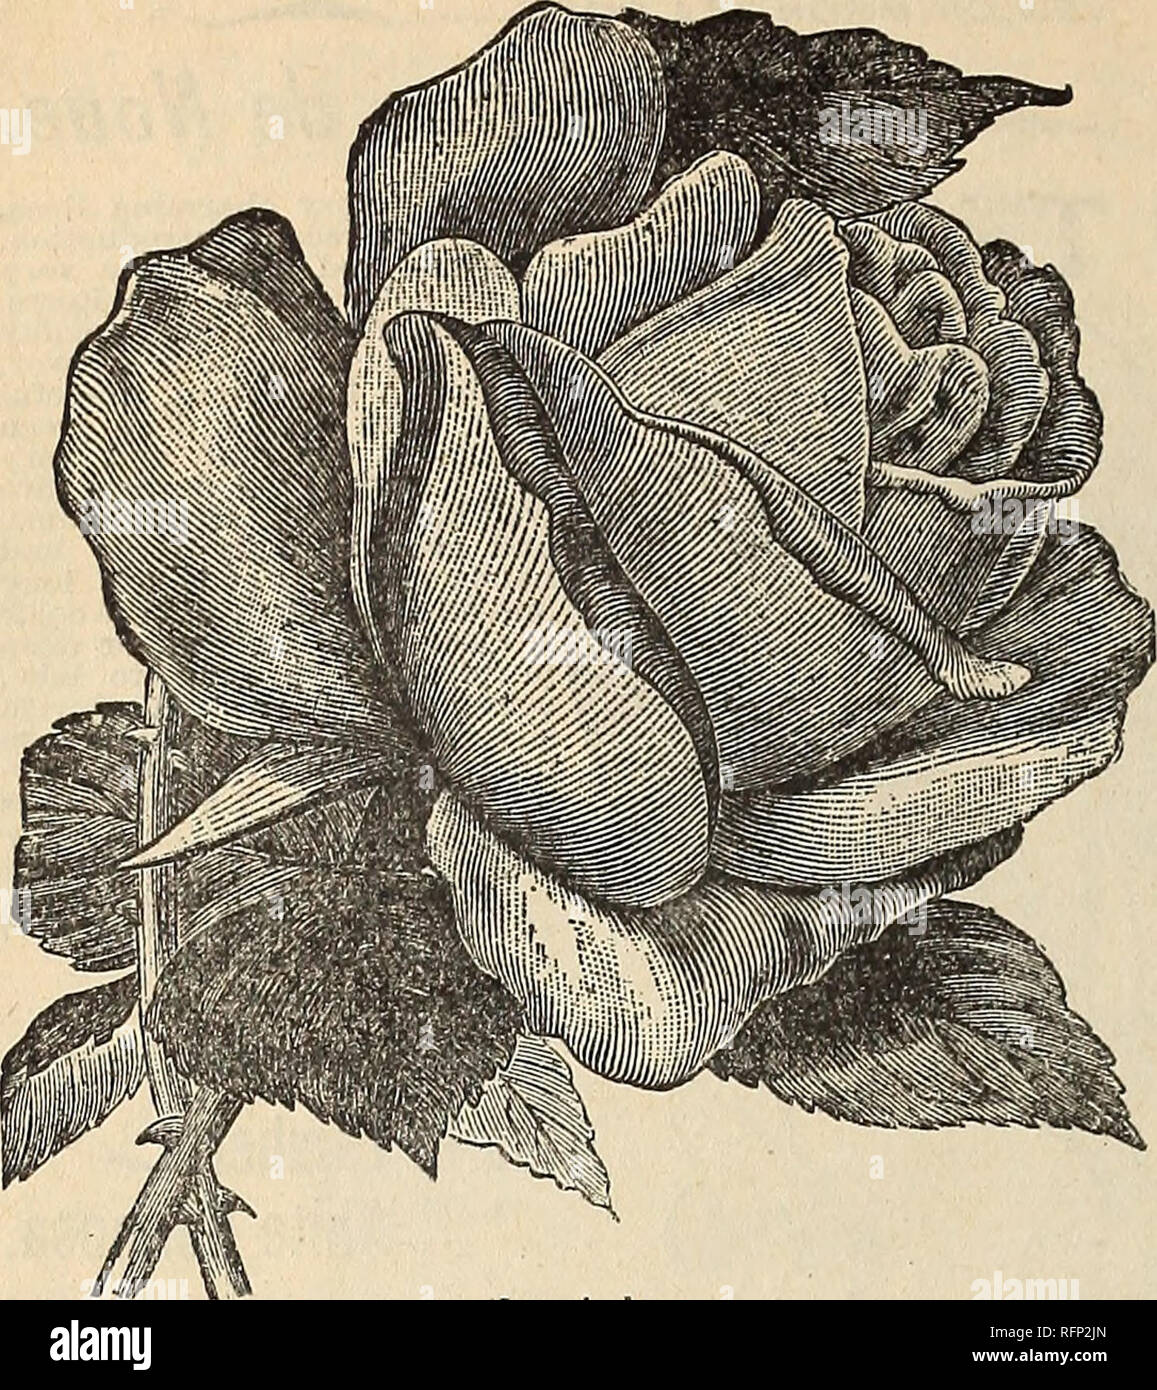 . Floral gems for 1896. Flowers Seeds Catalogs; Bulbs (Plants) Catalogs; Roses Catalogs; Plants, Ornamental Catalogs; Commercial catalogs Ohio Springfield; Flowers; Bulbs (Plants); Roses; Plants, Ornamental; Commercial catalogs. 16 McGregor Brothers, Florists, Springfield, Ohio.. The Charming New Tea Rose^ LUCIOLE. A new French Tea Rose of much more than ordinary merit, very bright carmine rose, tinted and shaded with saffron, the base of the petals being copper-yellow with reverse a rosy bronze, large, pointed, very double and very sweet-scented; flower stem roughened like a Moss Rose, the co Stock Photo